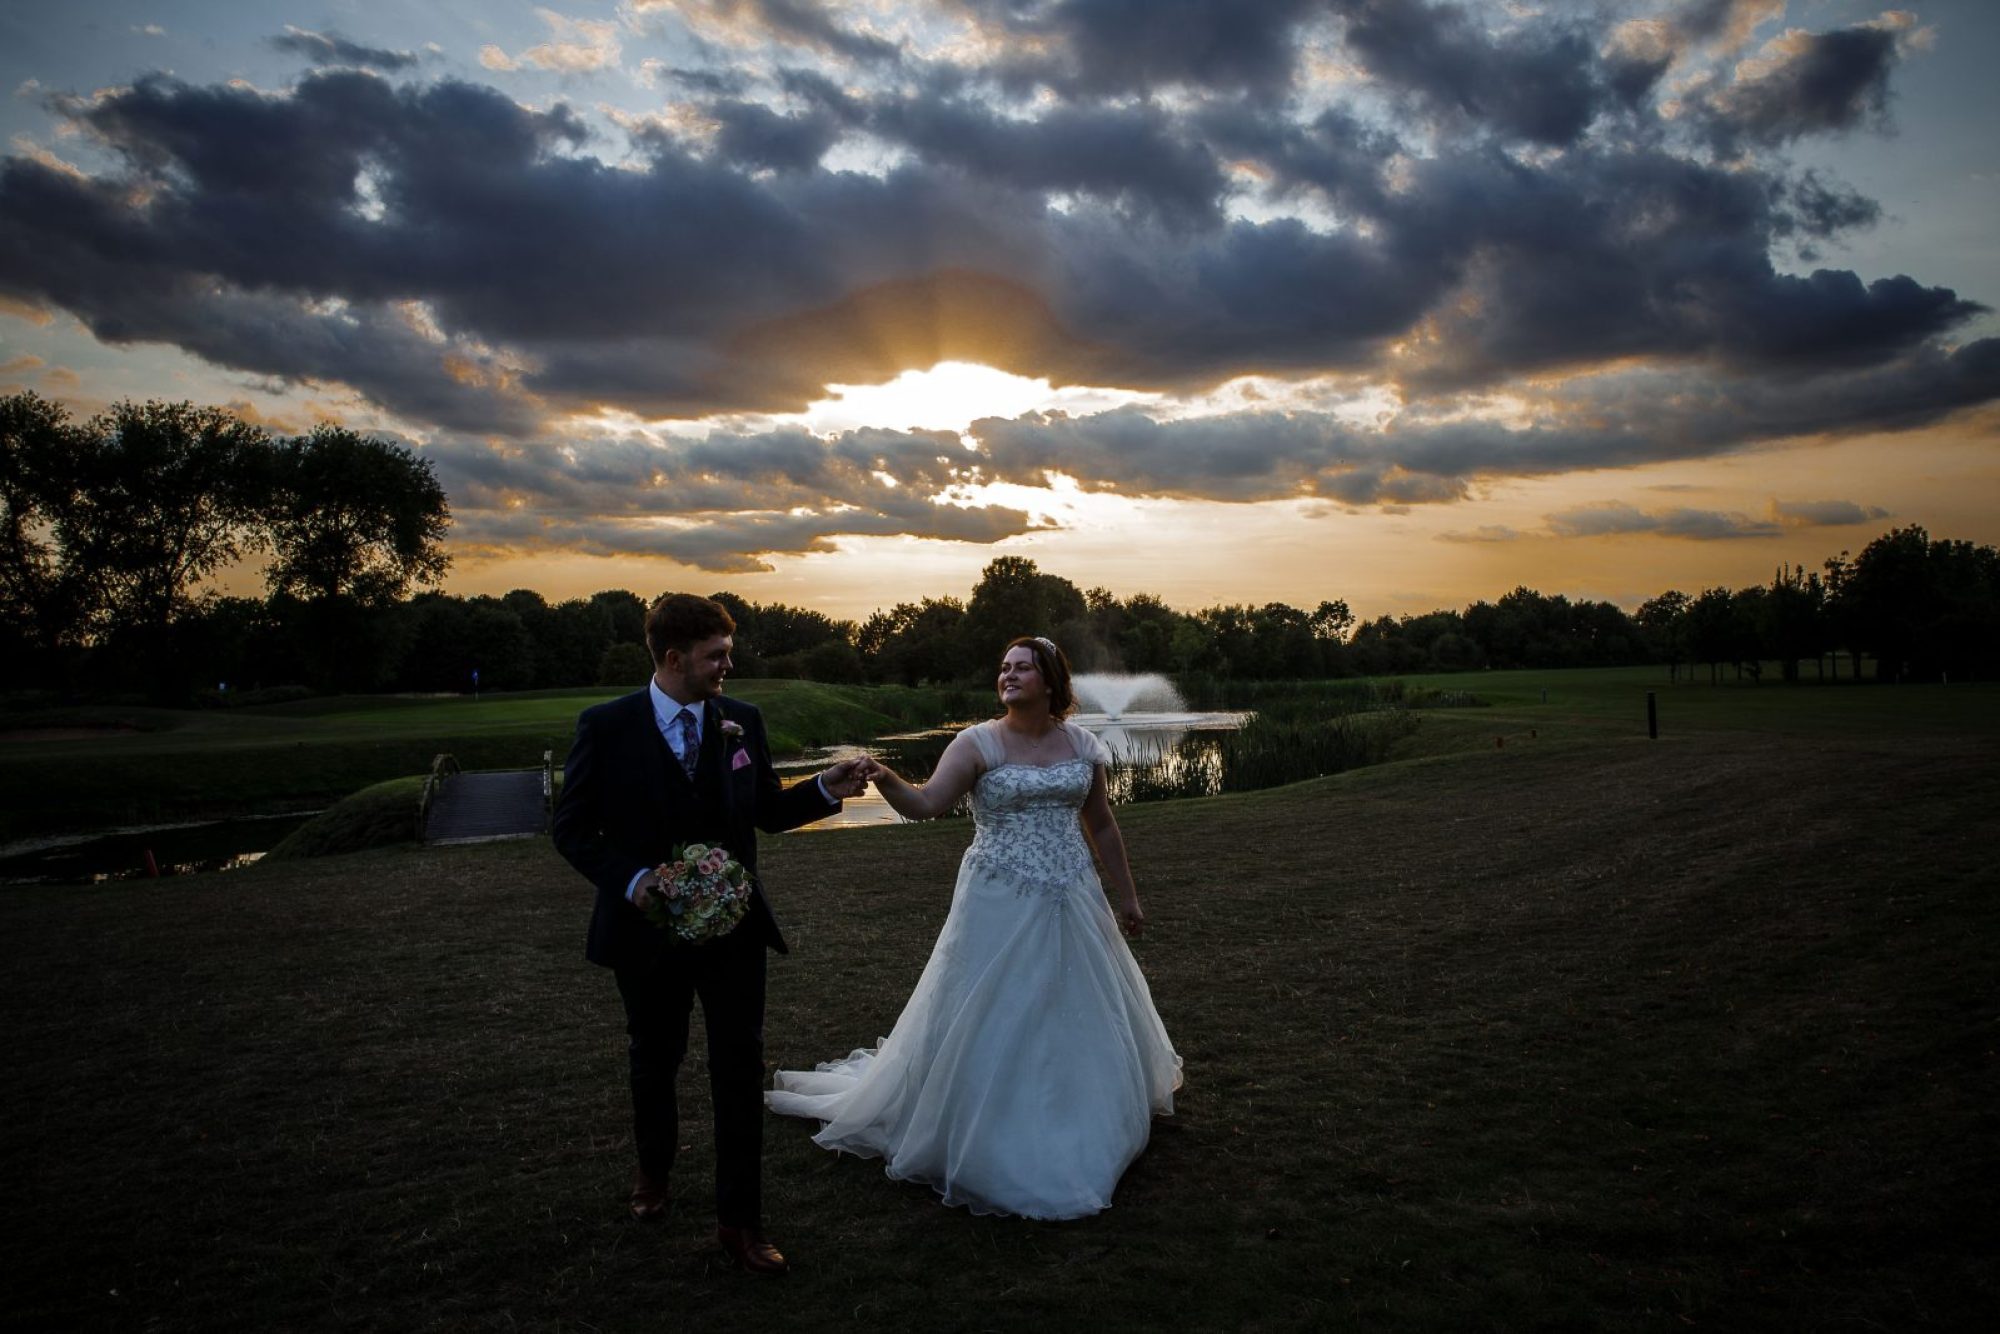 Happy couple at their wedding in Nottingham holding hands walking across the green landscape at sunset